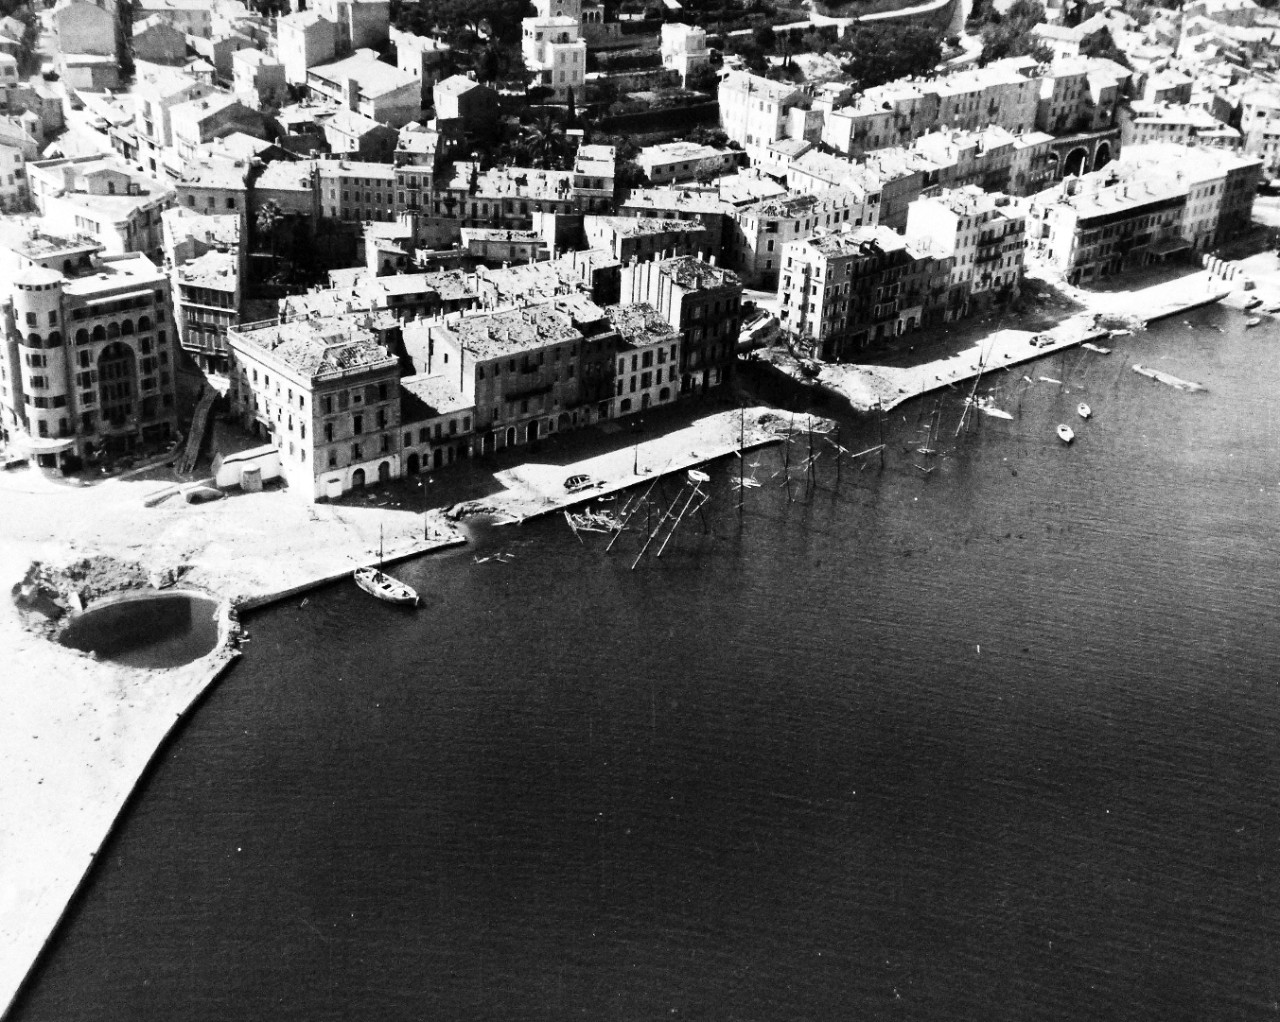 80-G-364085:  Invasion of Southern France, Toulon, August 1944.   Aerial view of Antibes, Toulon, France, showing destruction as a result of bombing.   Taken by crew of USS Catoctin (AGC-5).  Photograph received on 2 April 1946.   Official U.S. Navy Photograph, now in the collections of the National Archives.  (2014/7/10).